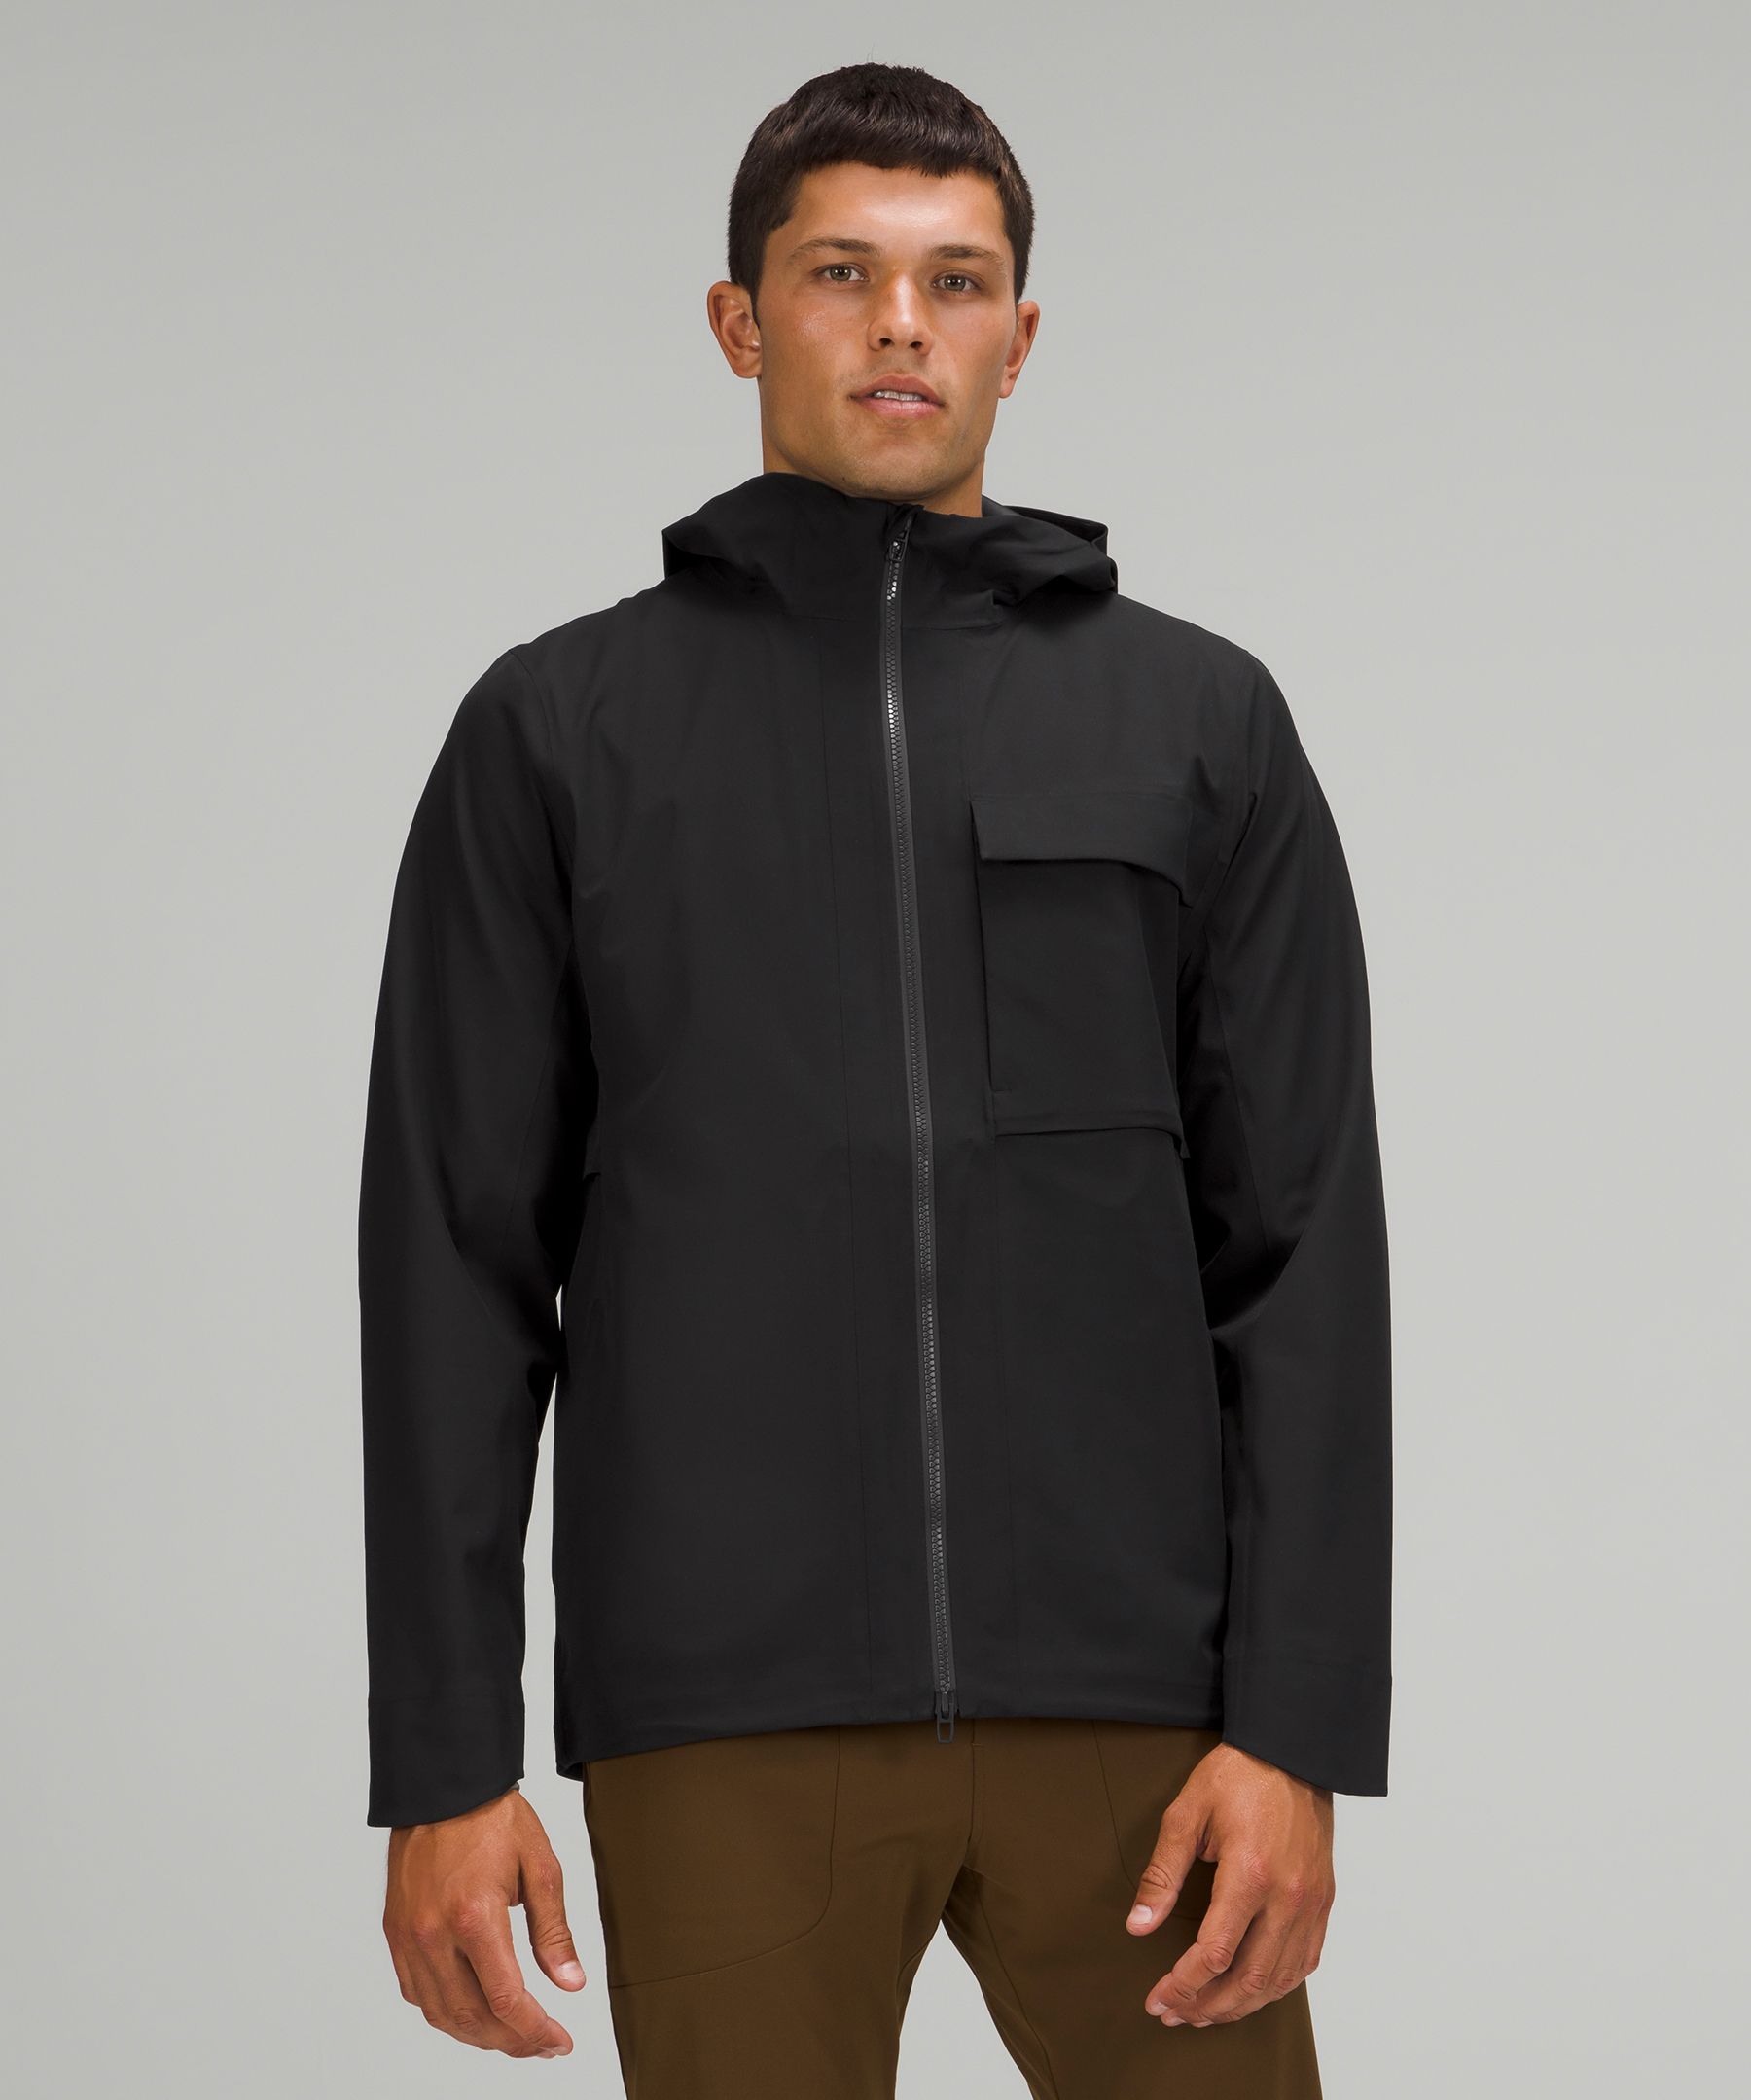 Outpour StretchSeal Jacket | ジャケット＆アウター | Lululemon JP